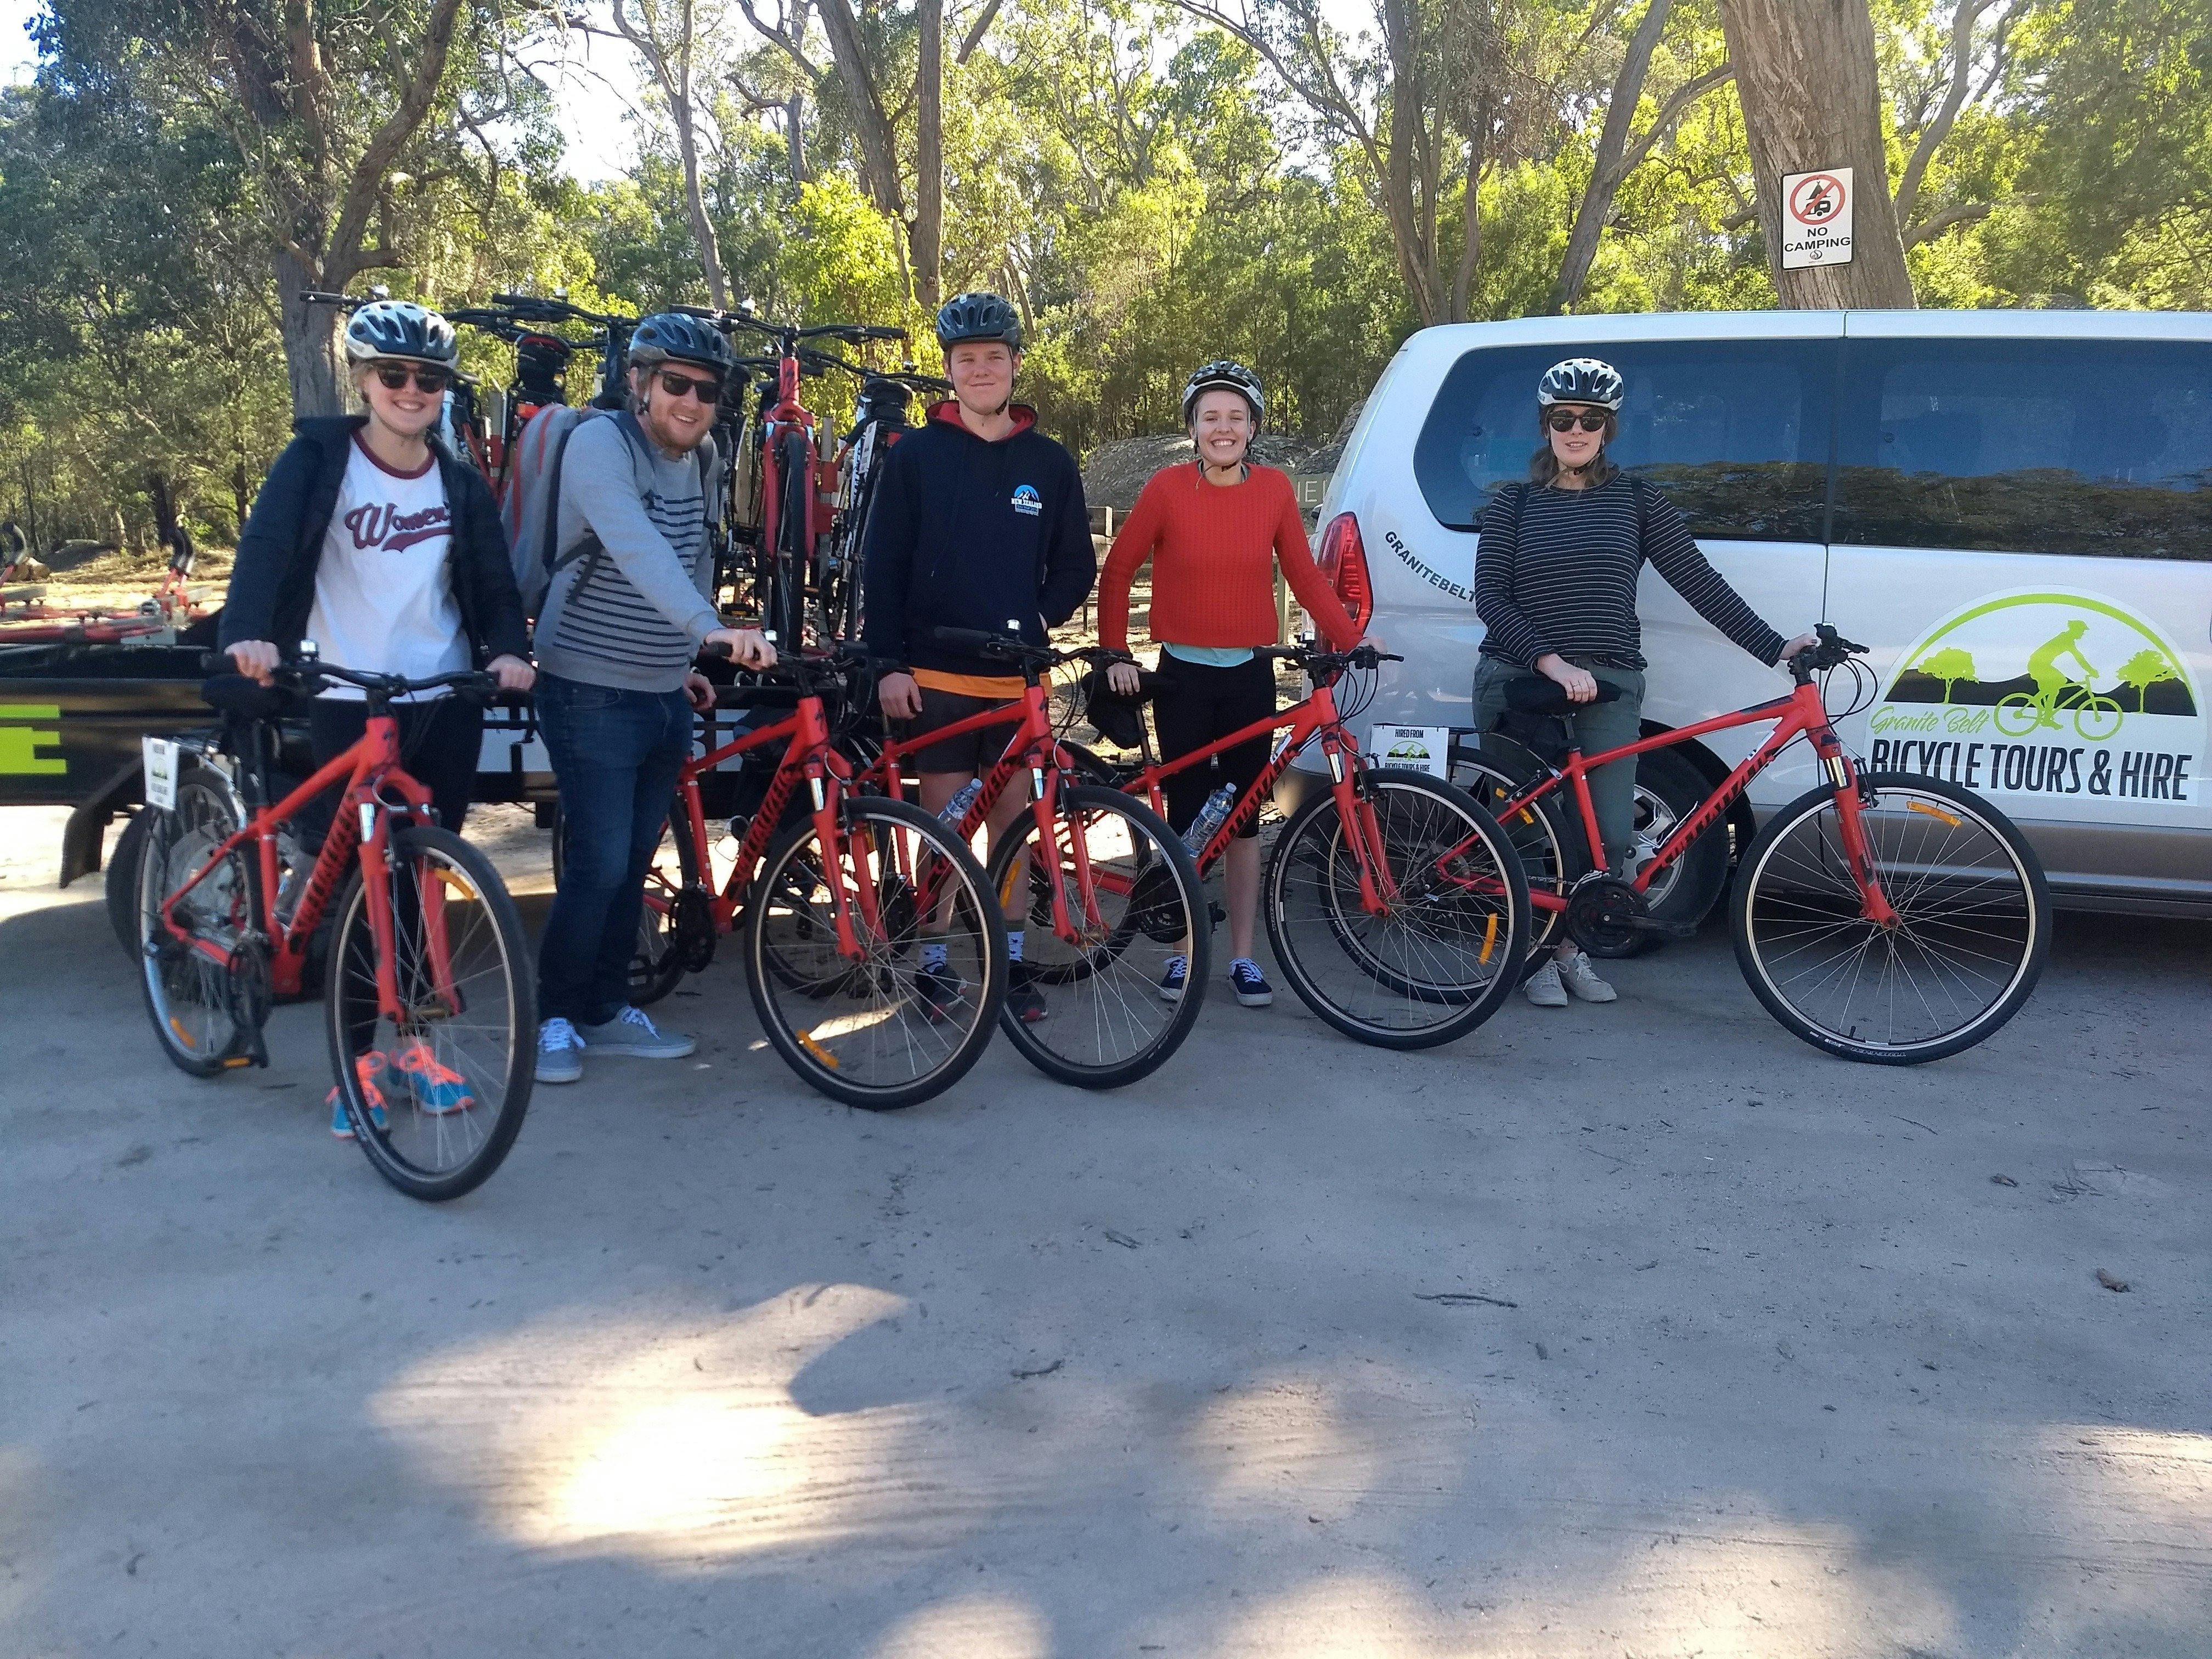 Granite Belt Bicycle Tours and Hire